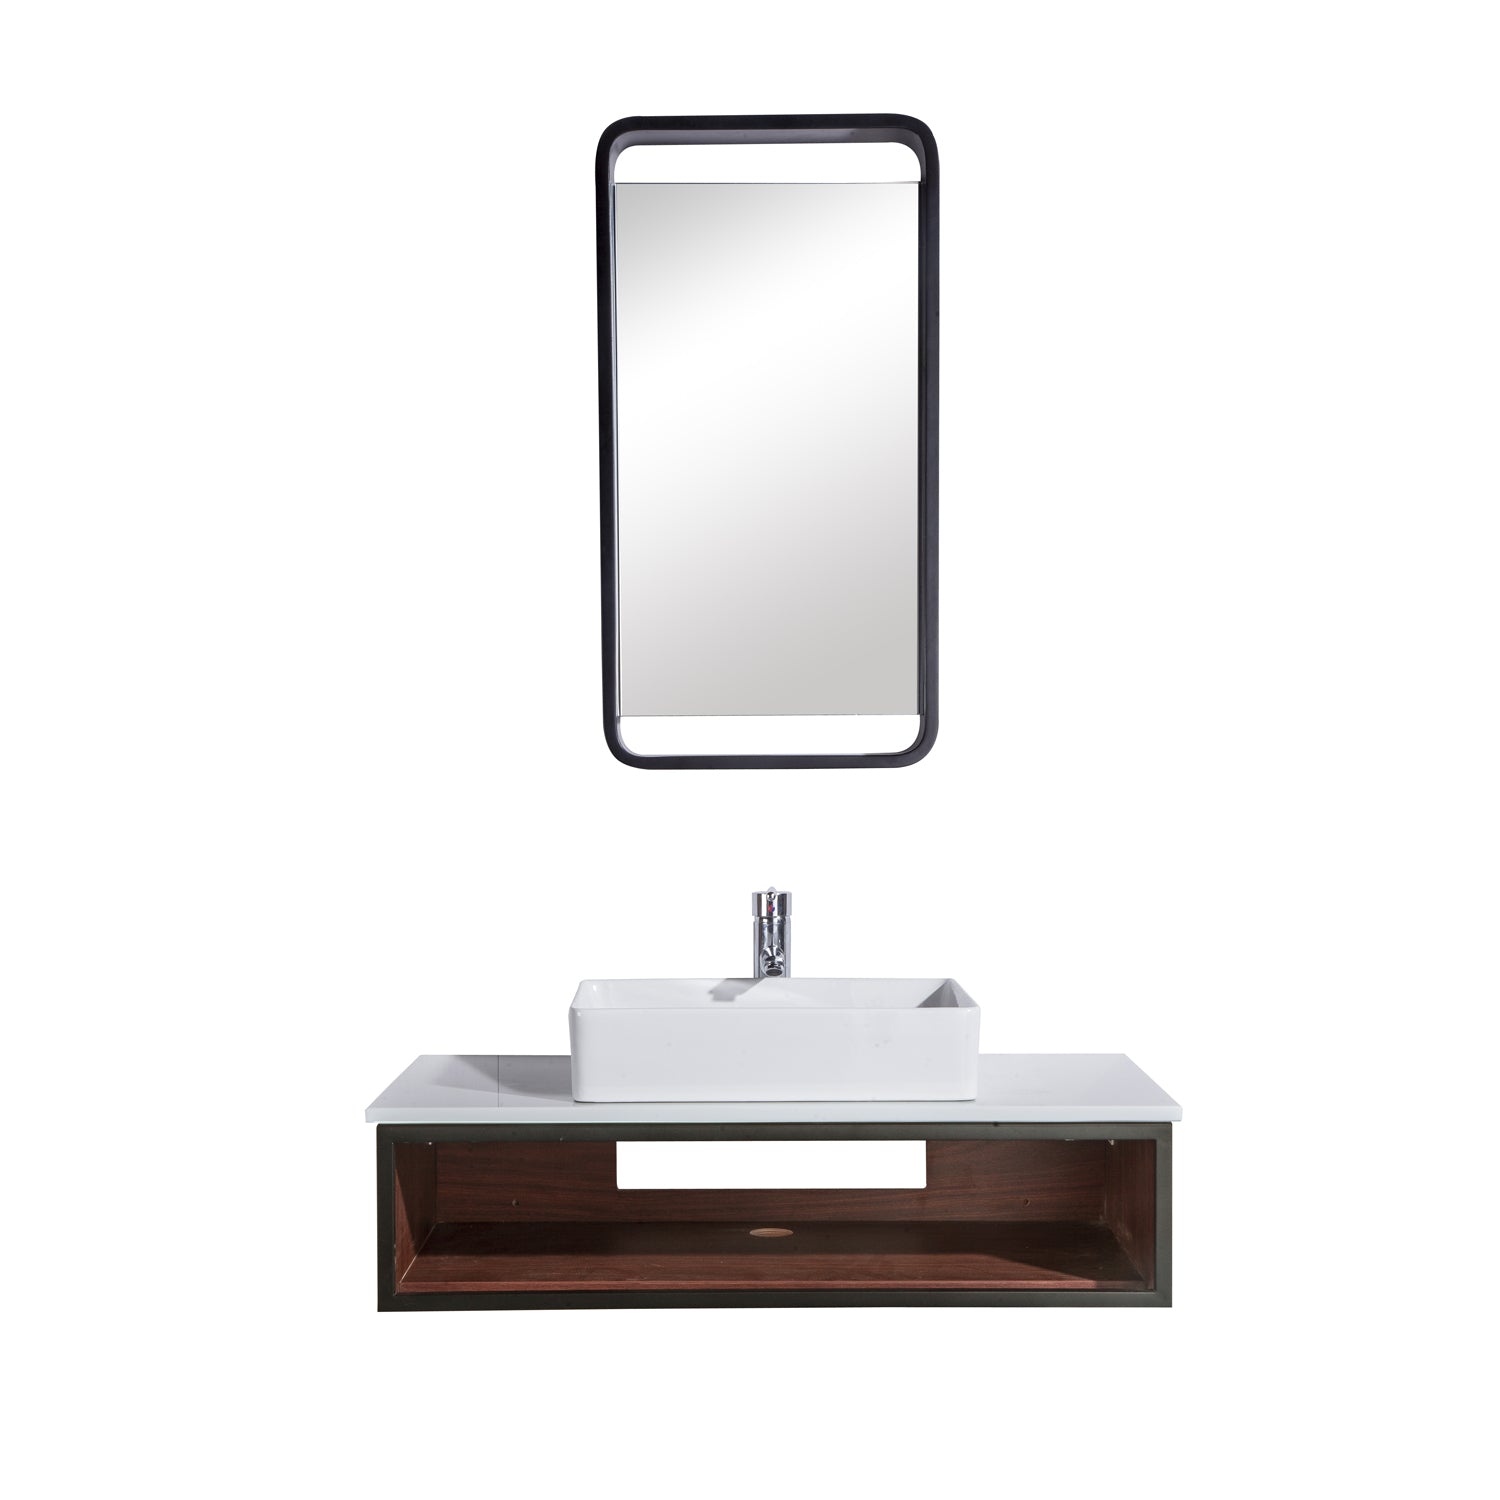 36" Single Vanity Cabinet Set, Wall Mount, Mirror and White Ceramic Vessel Sink with Gloss White Glass Countertop and Shelf, Black Walnut Finish, Citta Collection by DAX